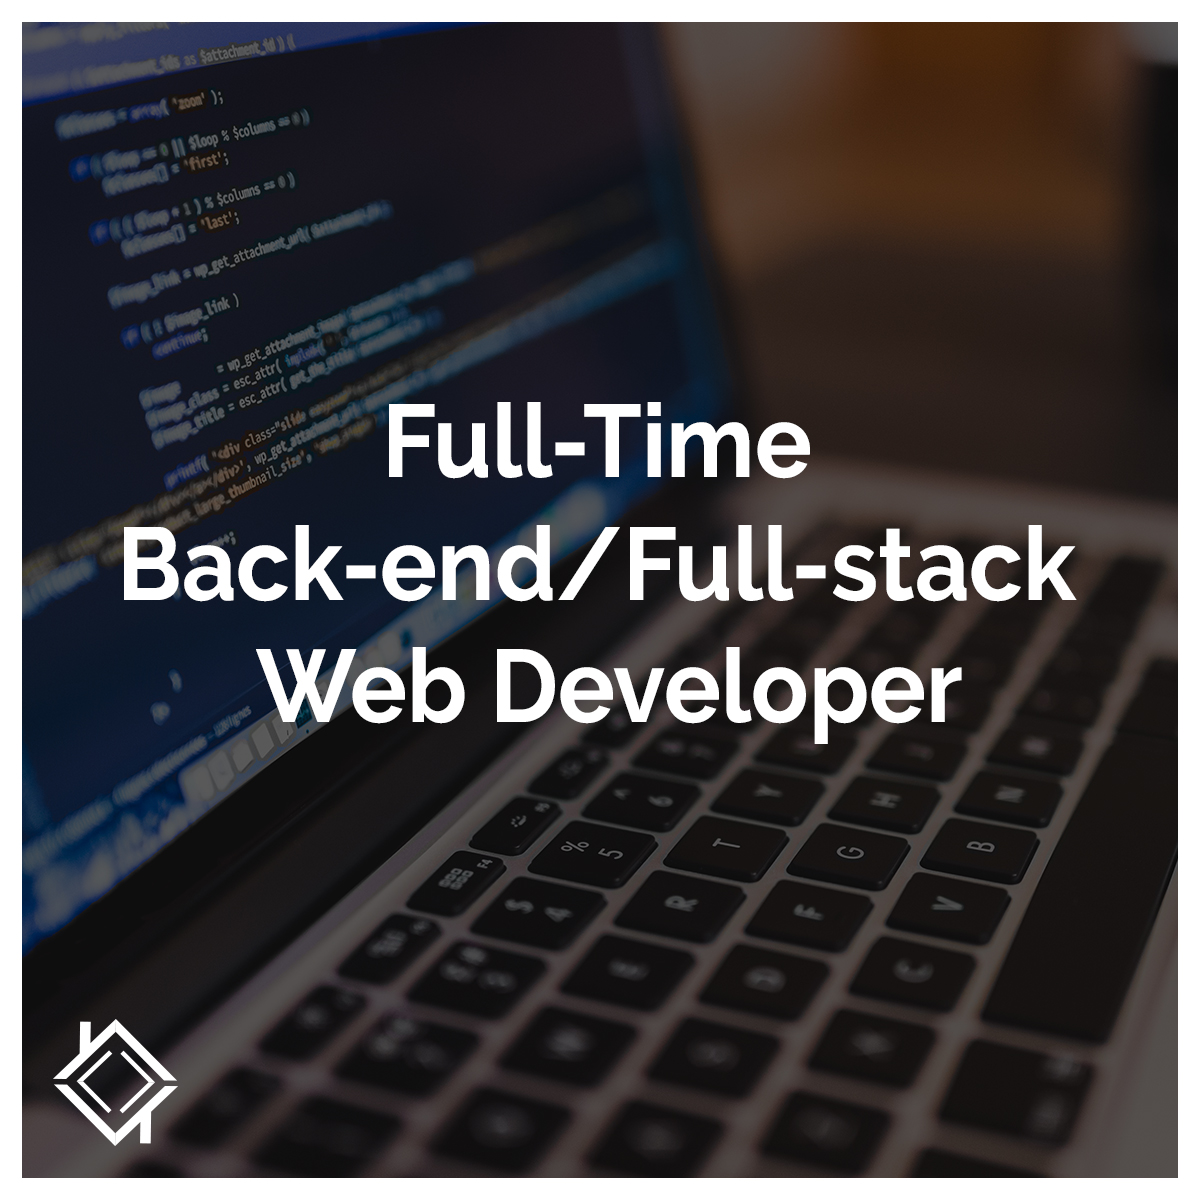 Full time back-end/full-stack web developer written in white over an image with an open laptop with code on the screen